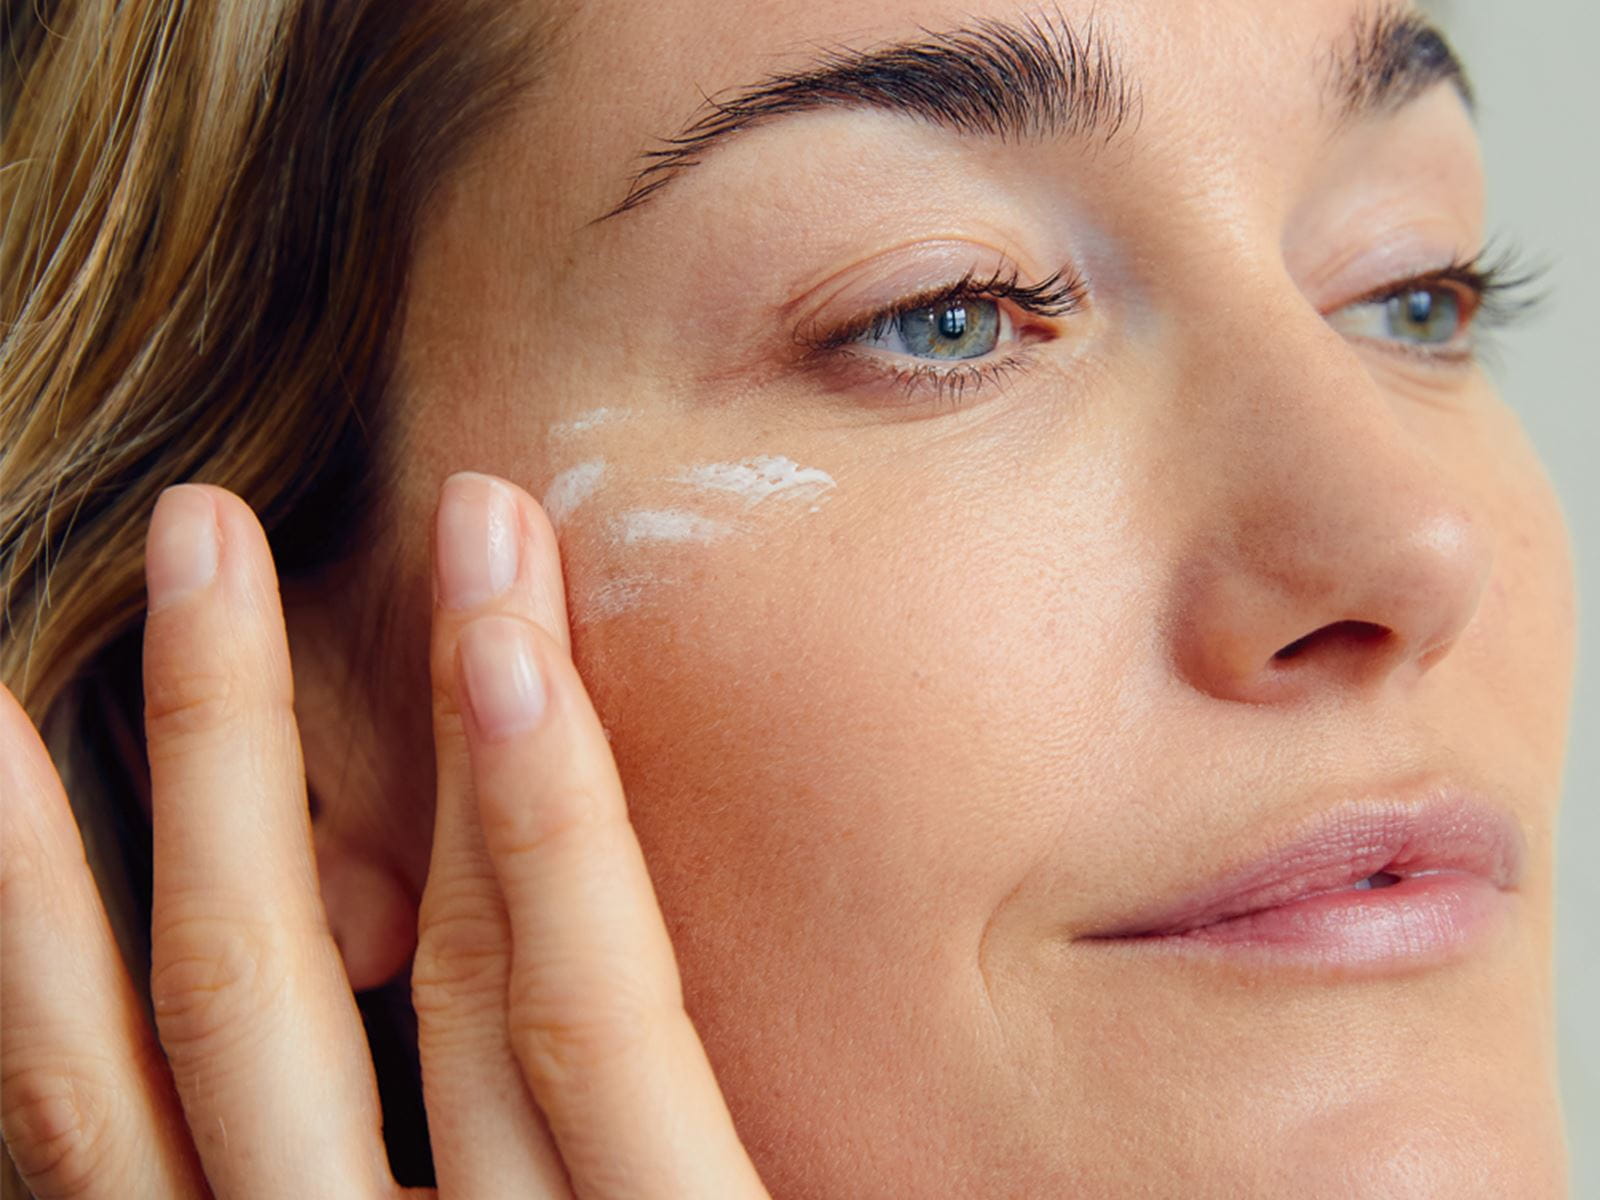 A woman delicately applying moisturizer to her face.